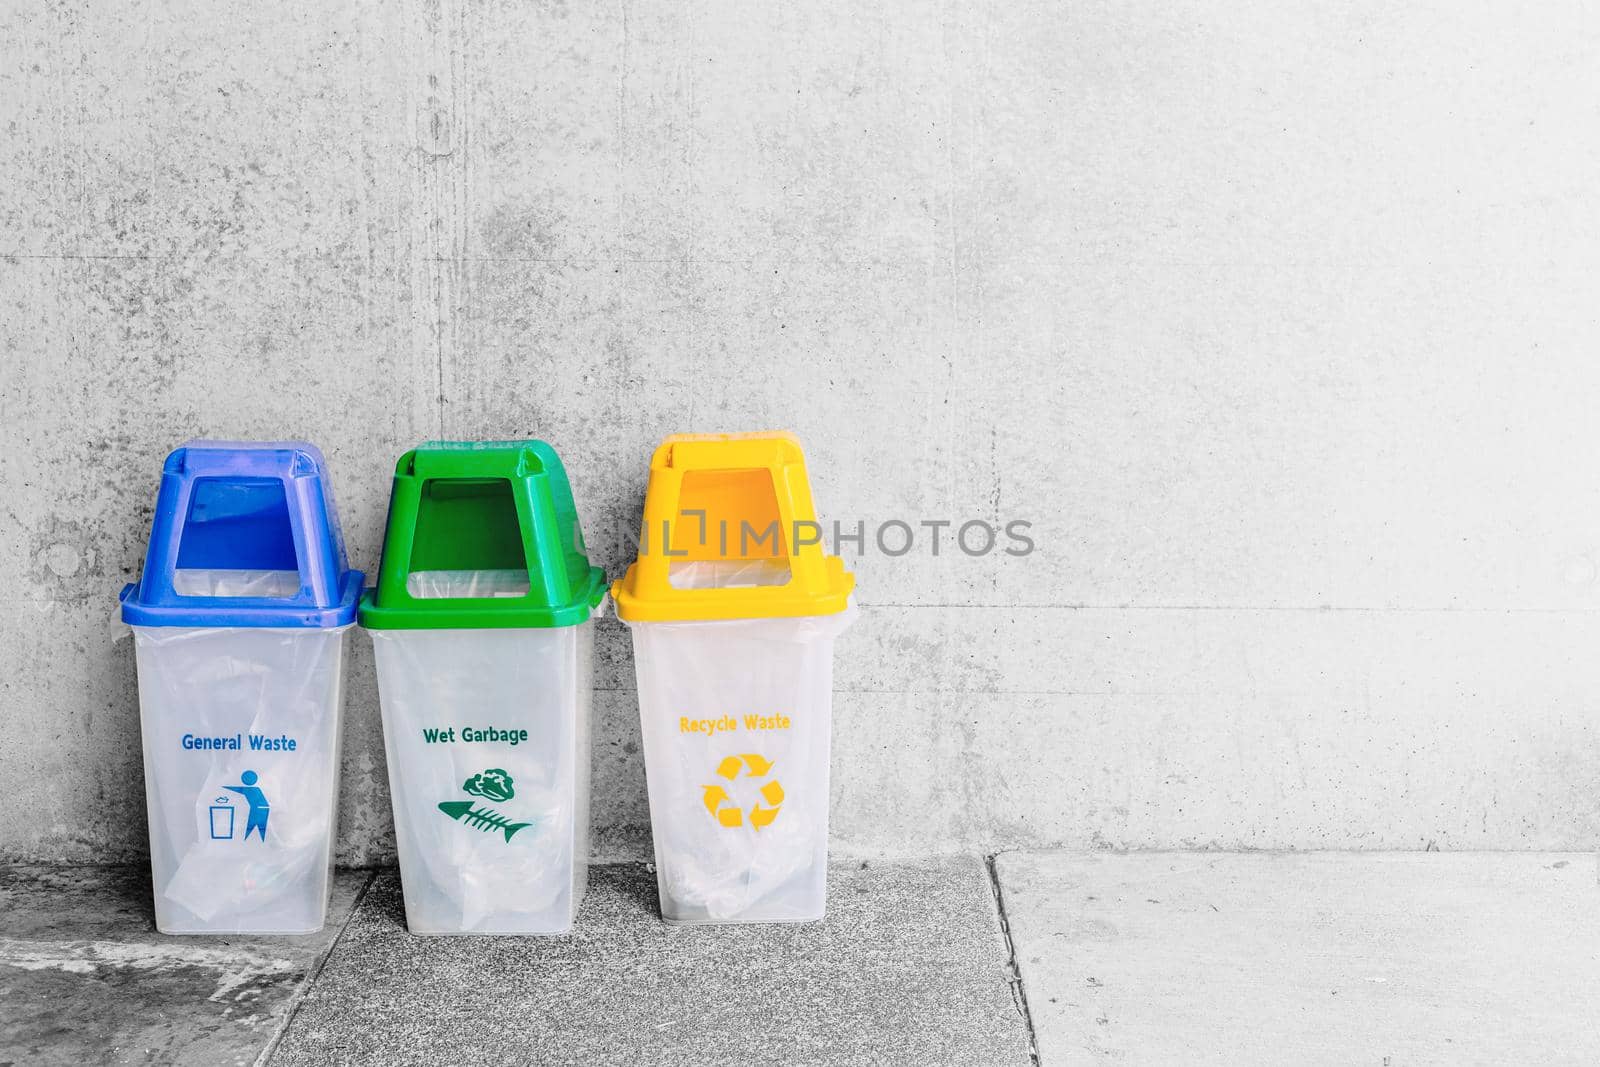 General Waste blue Wet Garbage green and Recycle Waste Yellow trash bin with space for text.